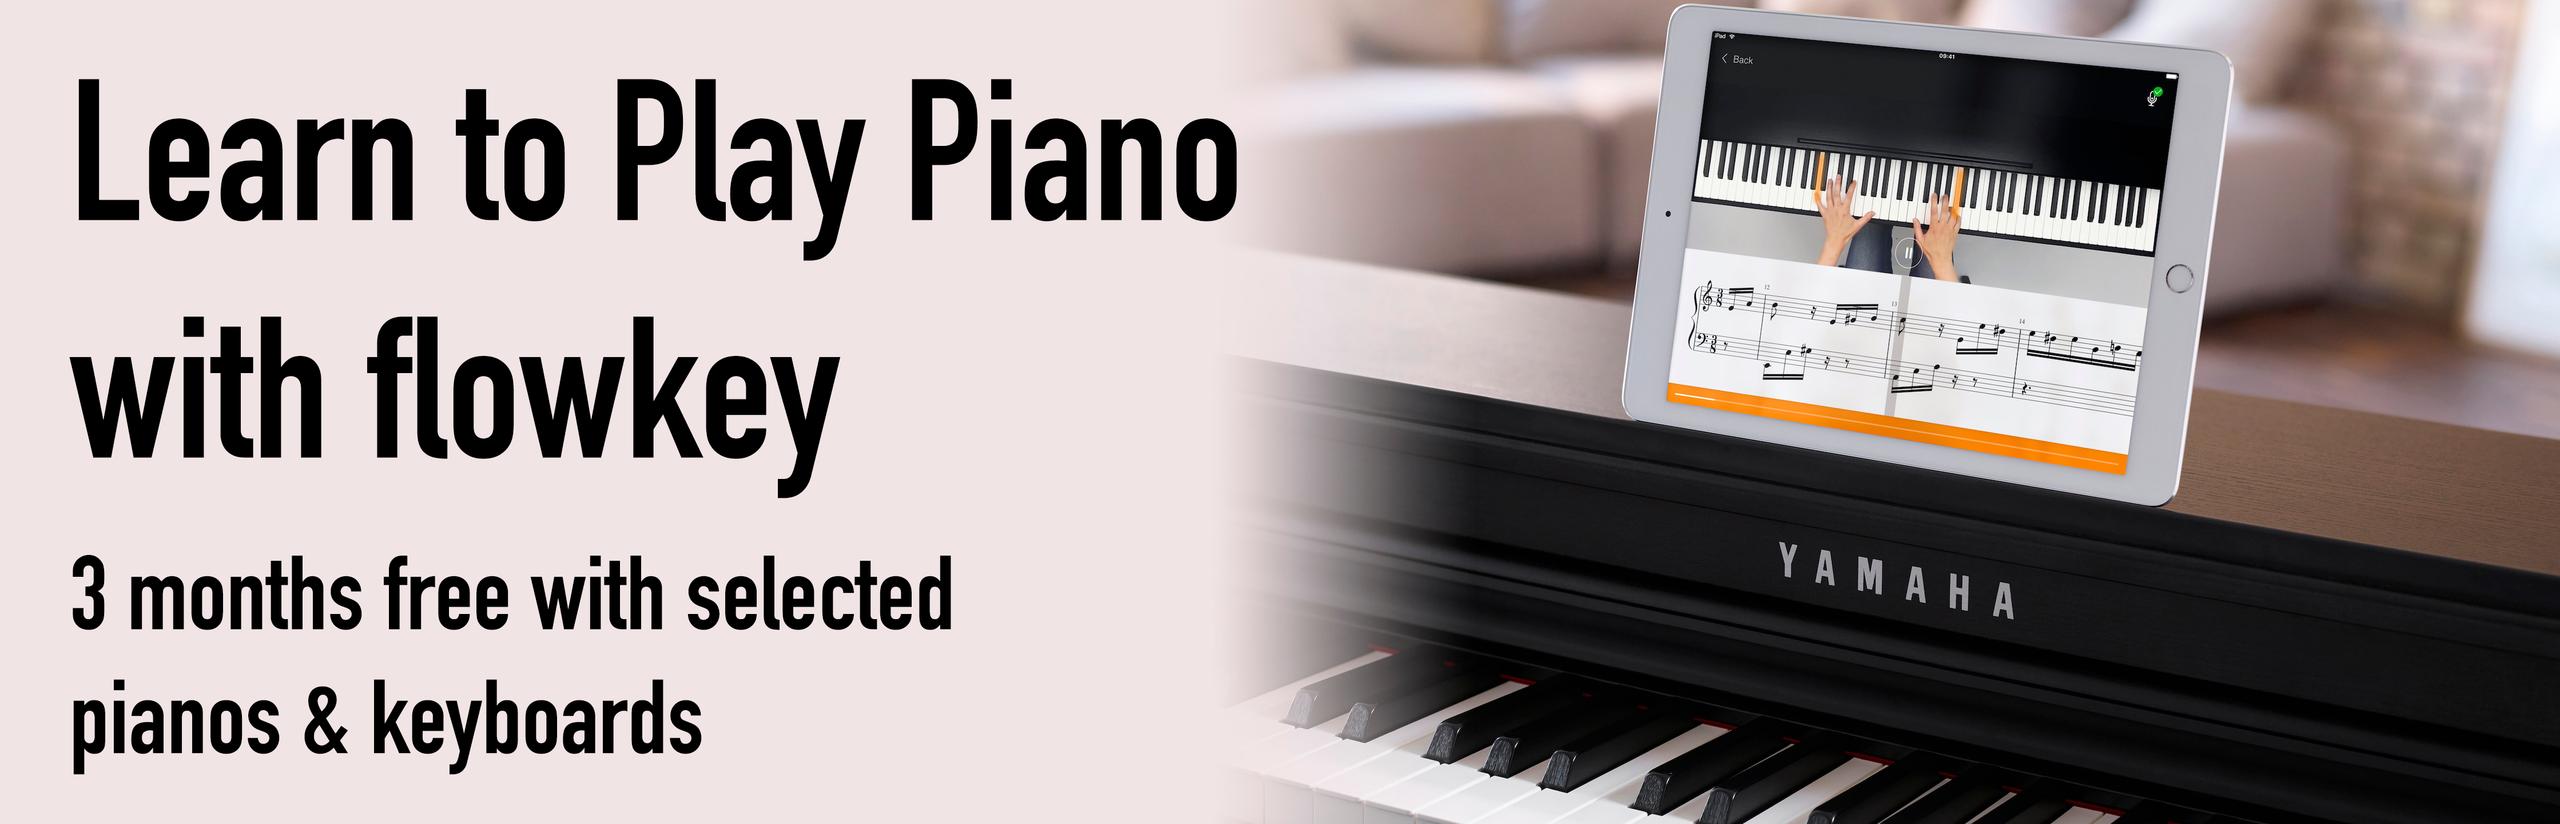 Learn to Play Piano with flowkey - 3 months free with selected pianos and keyboards